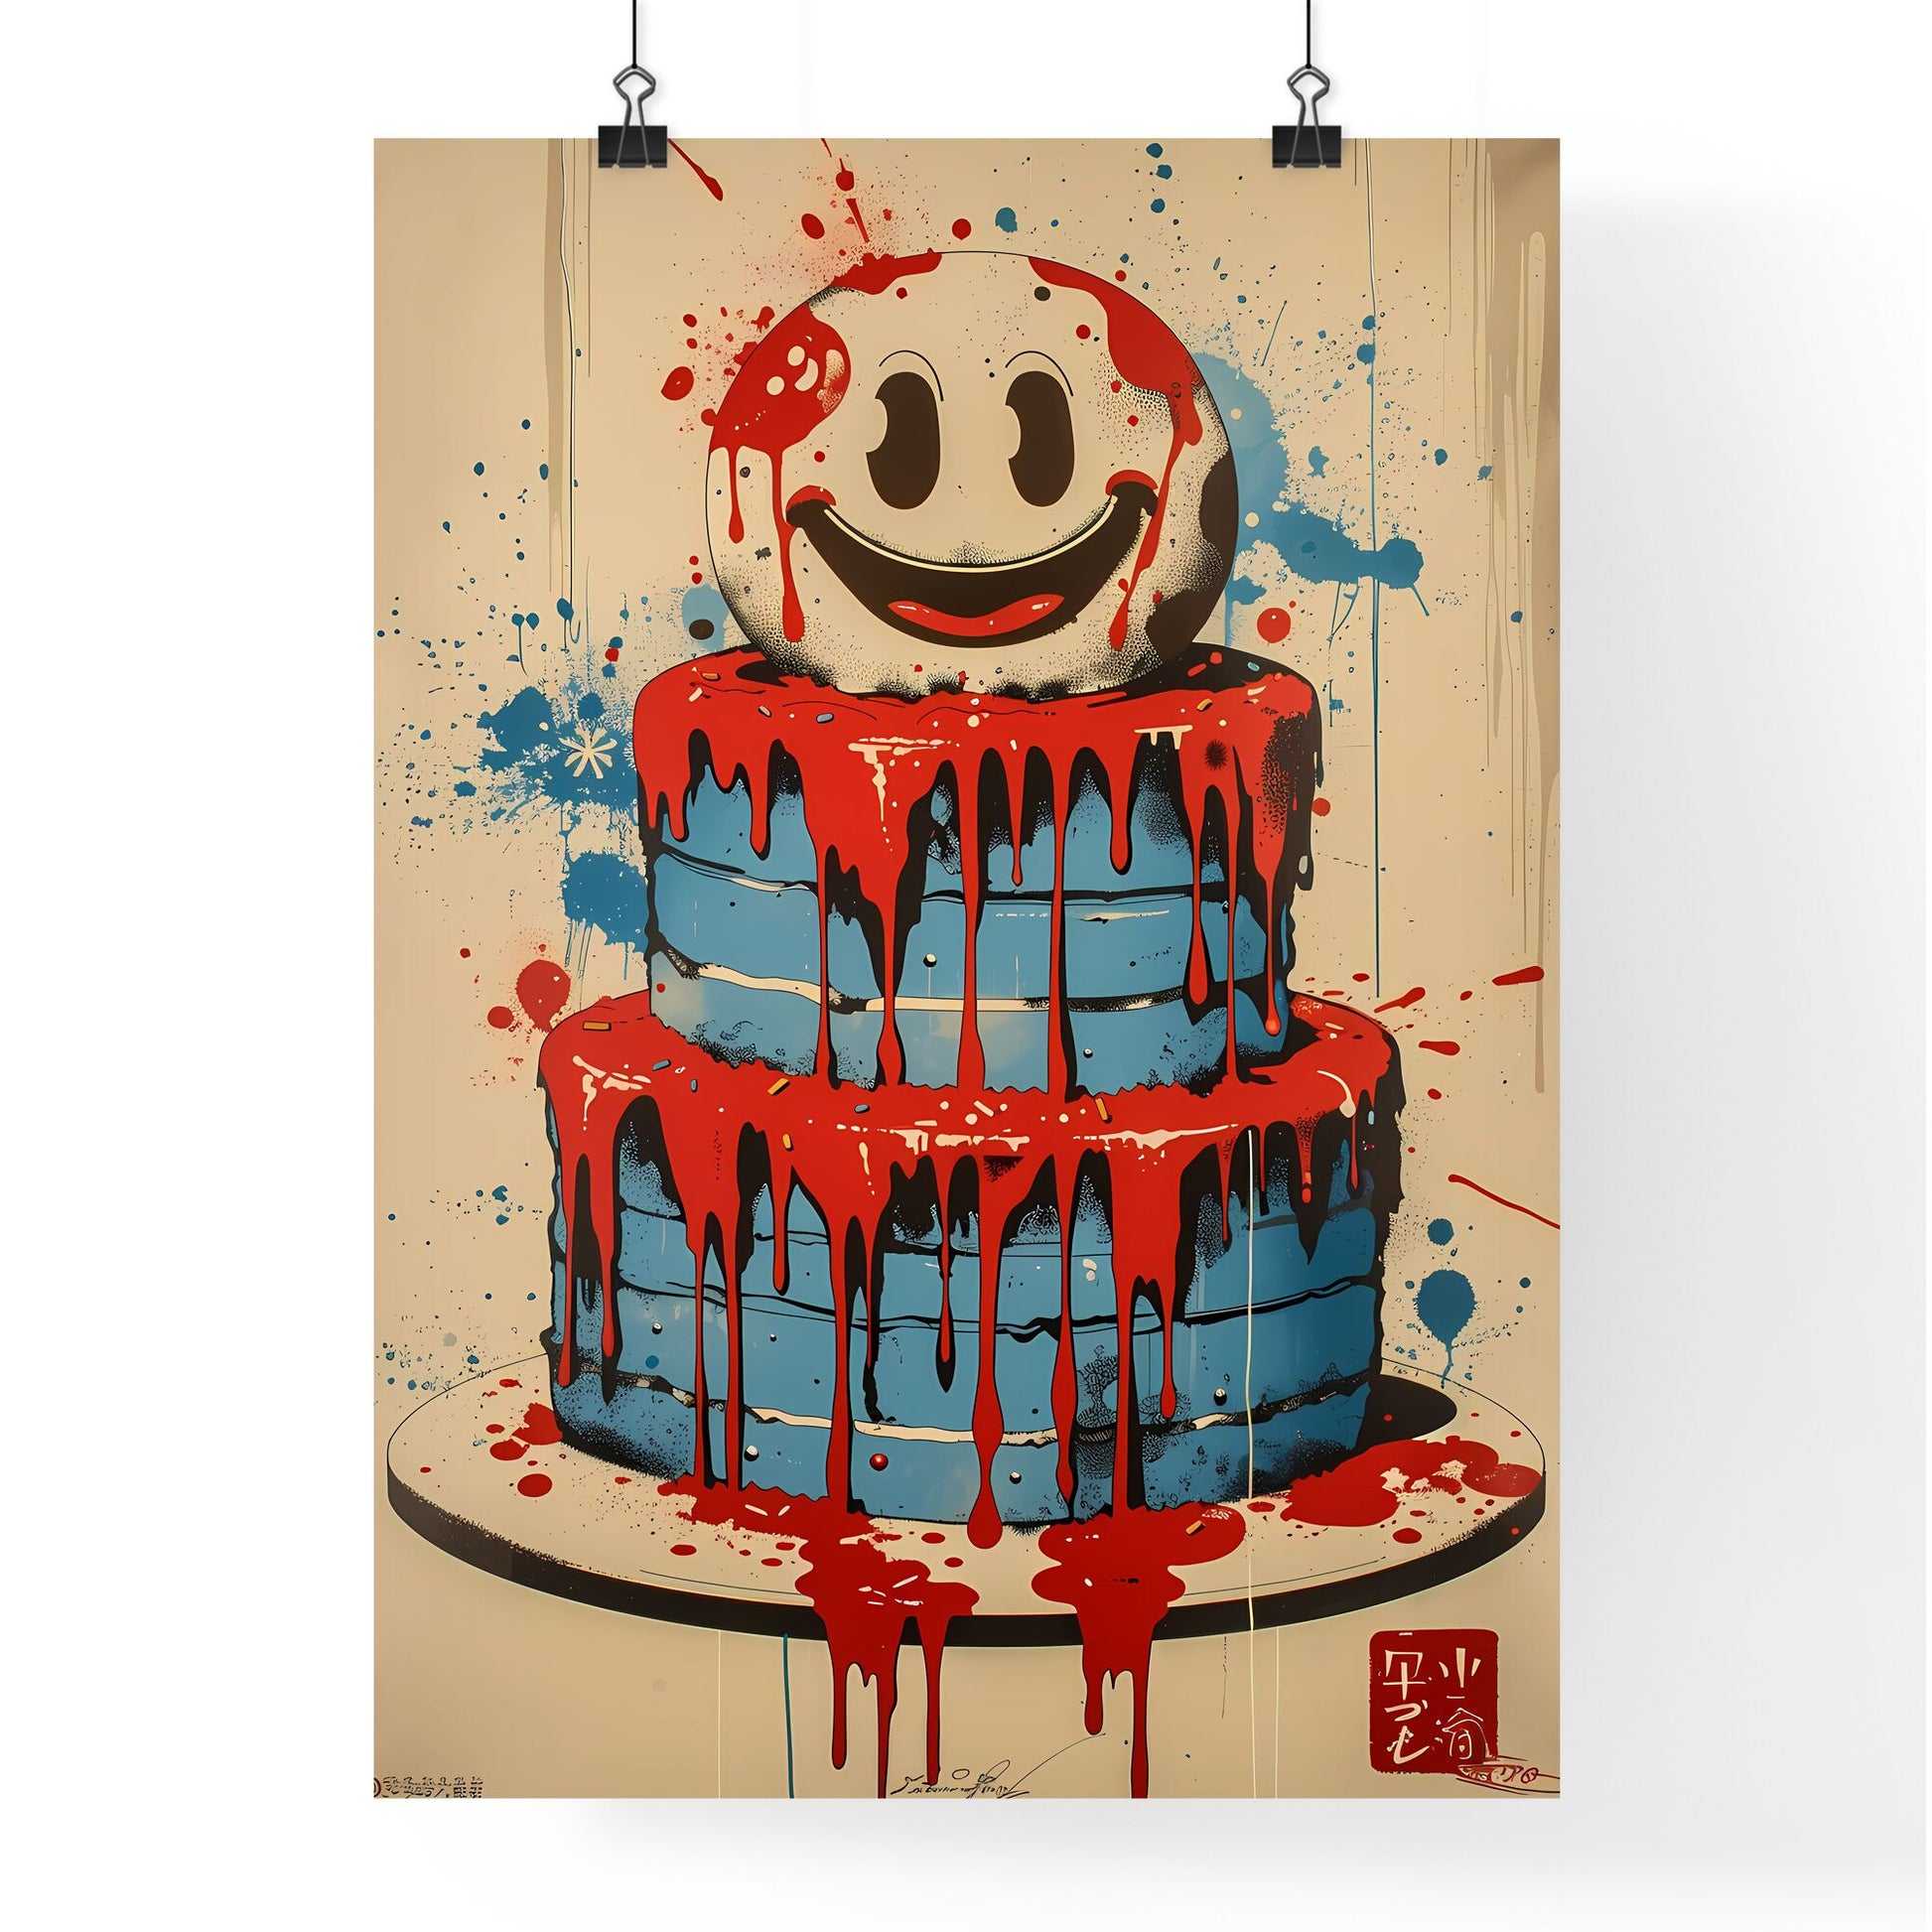 1960s Japanese Pop Art Wedding Cake Character in Vibrant Colors - Retro Vintage Poster with Acid Smiley Symbol and Simple Background Default Title